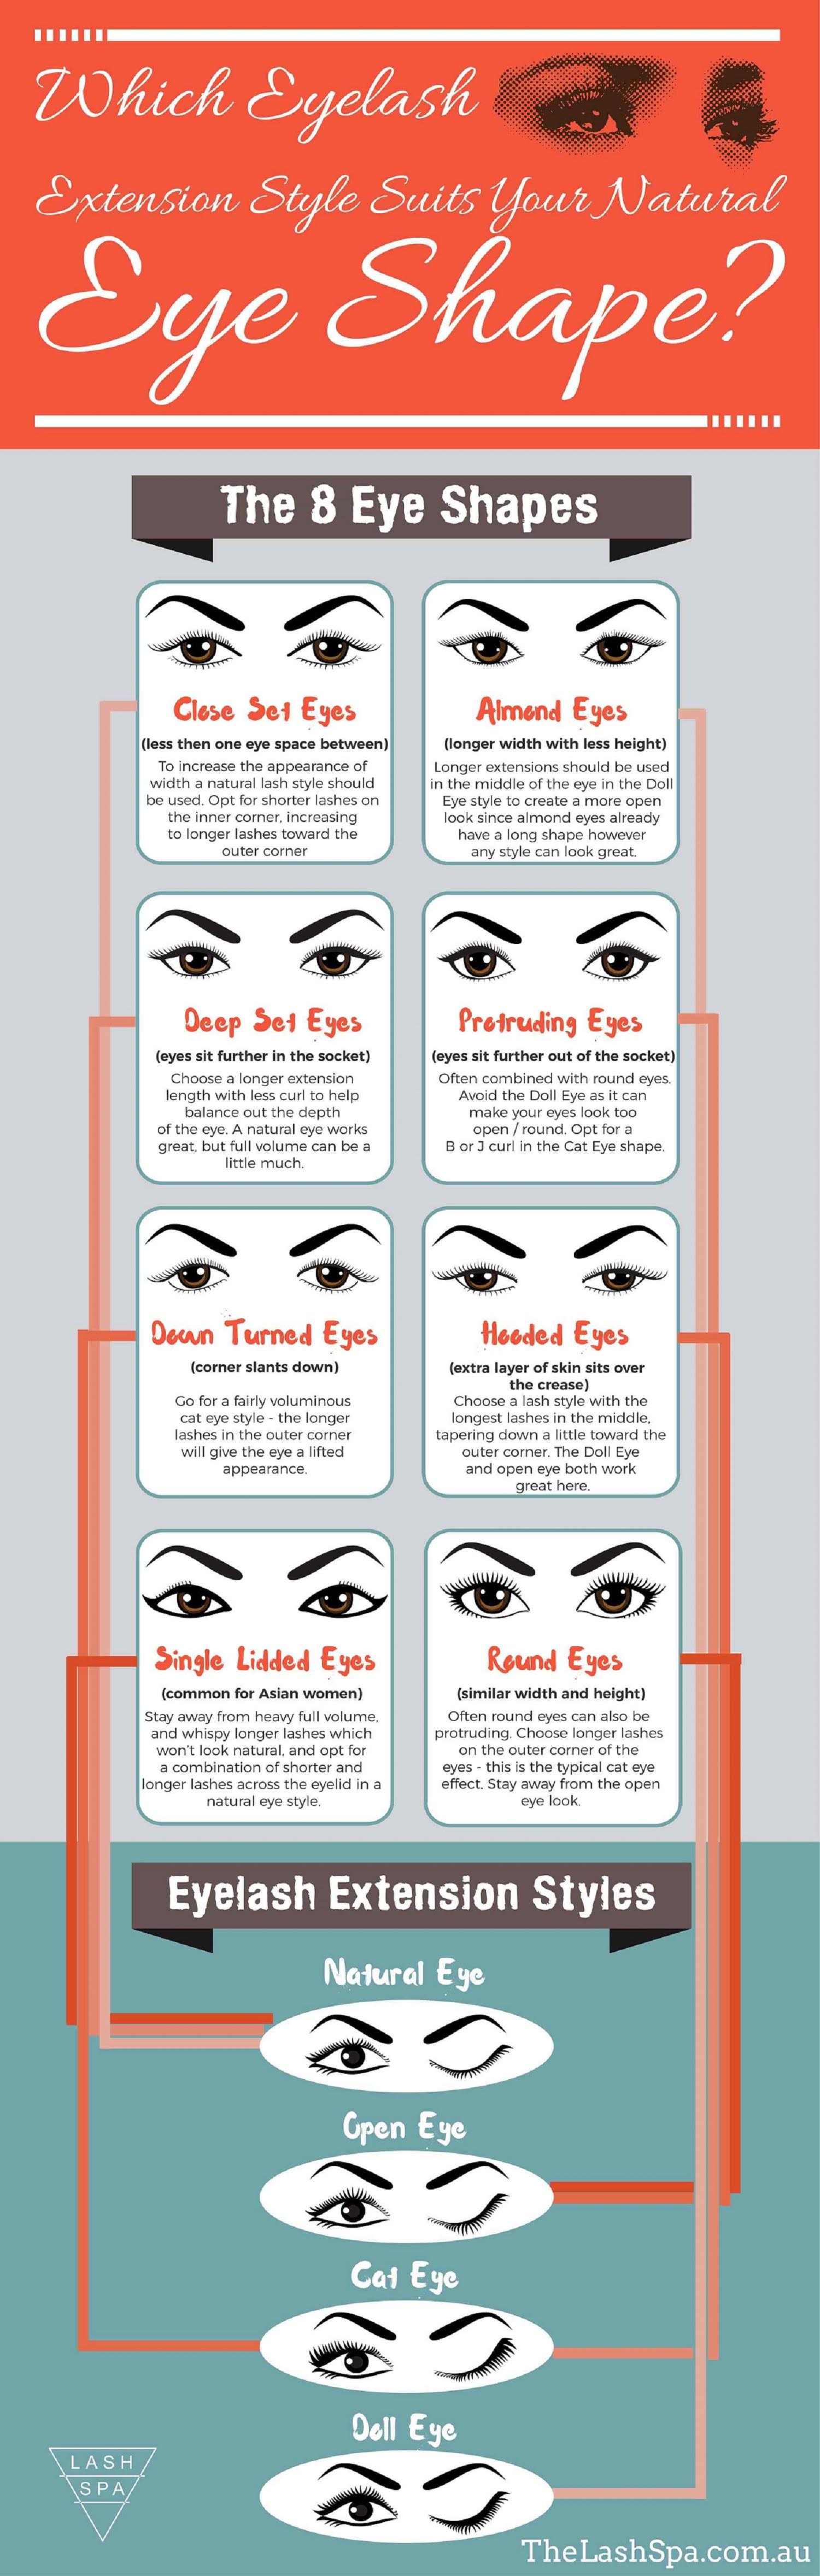 Which Eyelash Extension Style Suits Your Natural Eye Shape? #infographic 